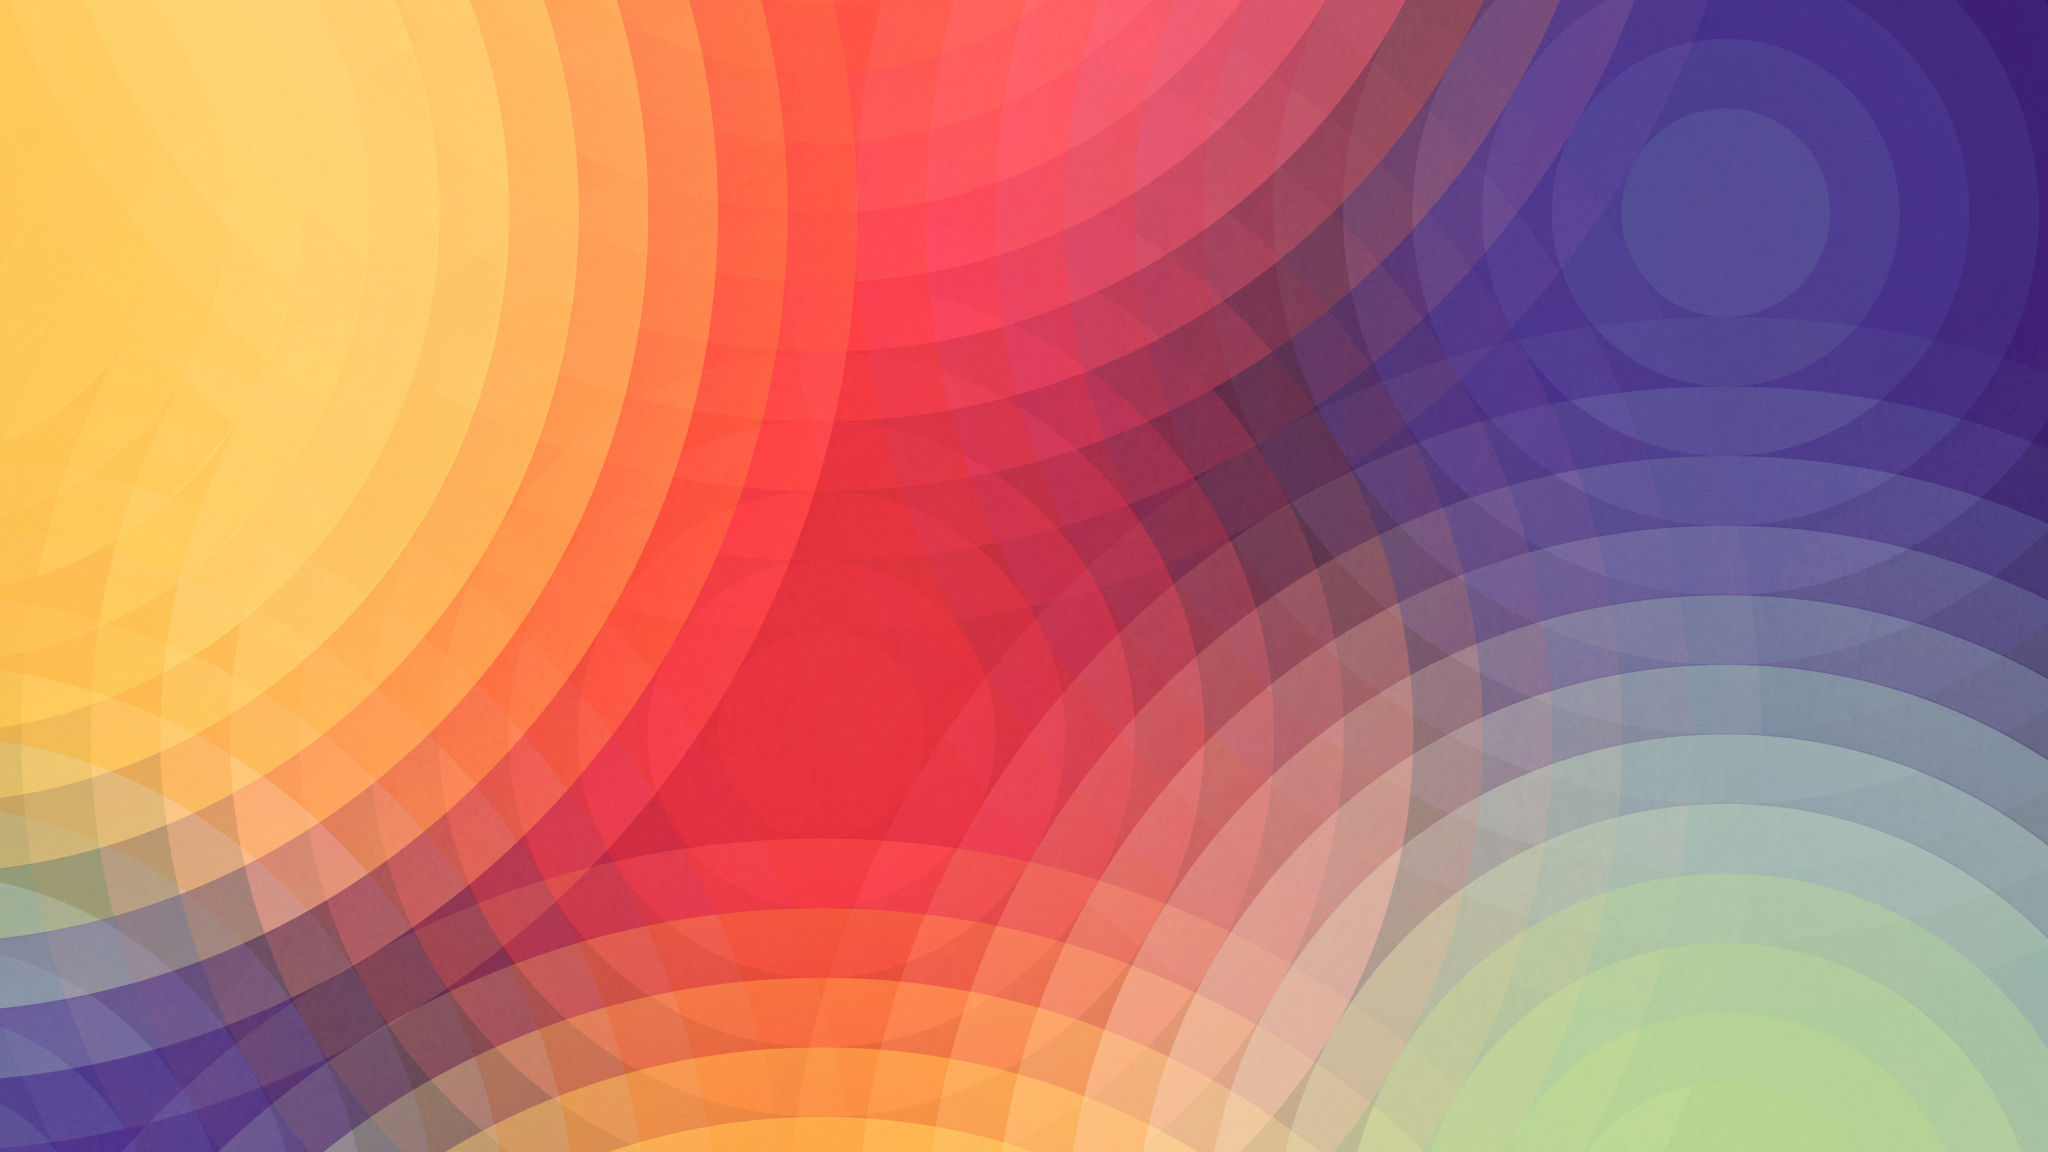 Download 48x1152 Wallpaper Circles Colorful Multicolor Nexus 7 Stock Dual Wide Widescreen 48x1152 Hd Image Background 254